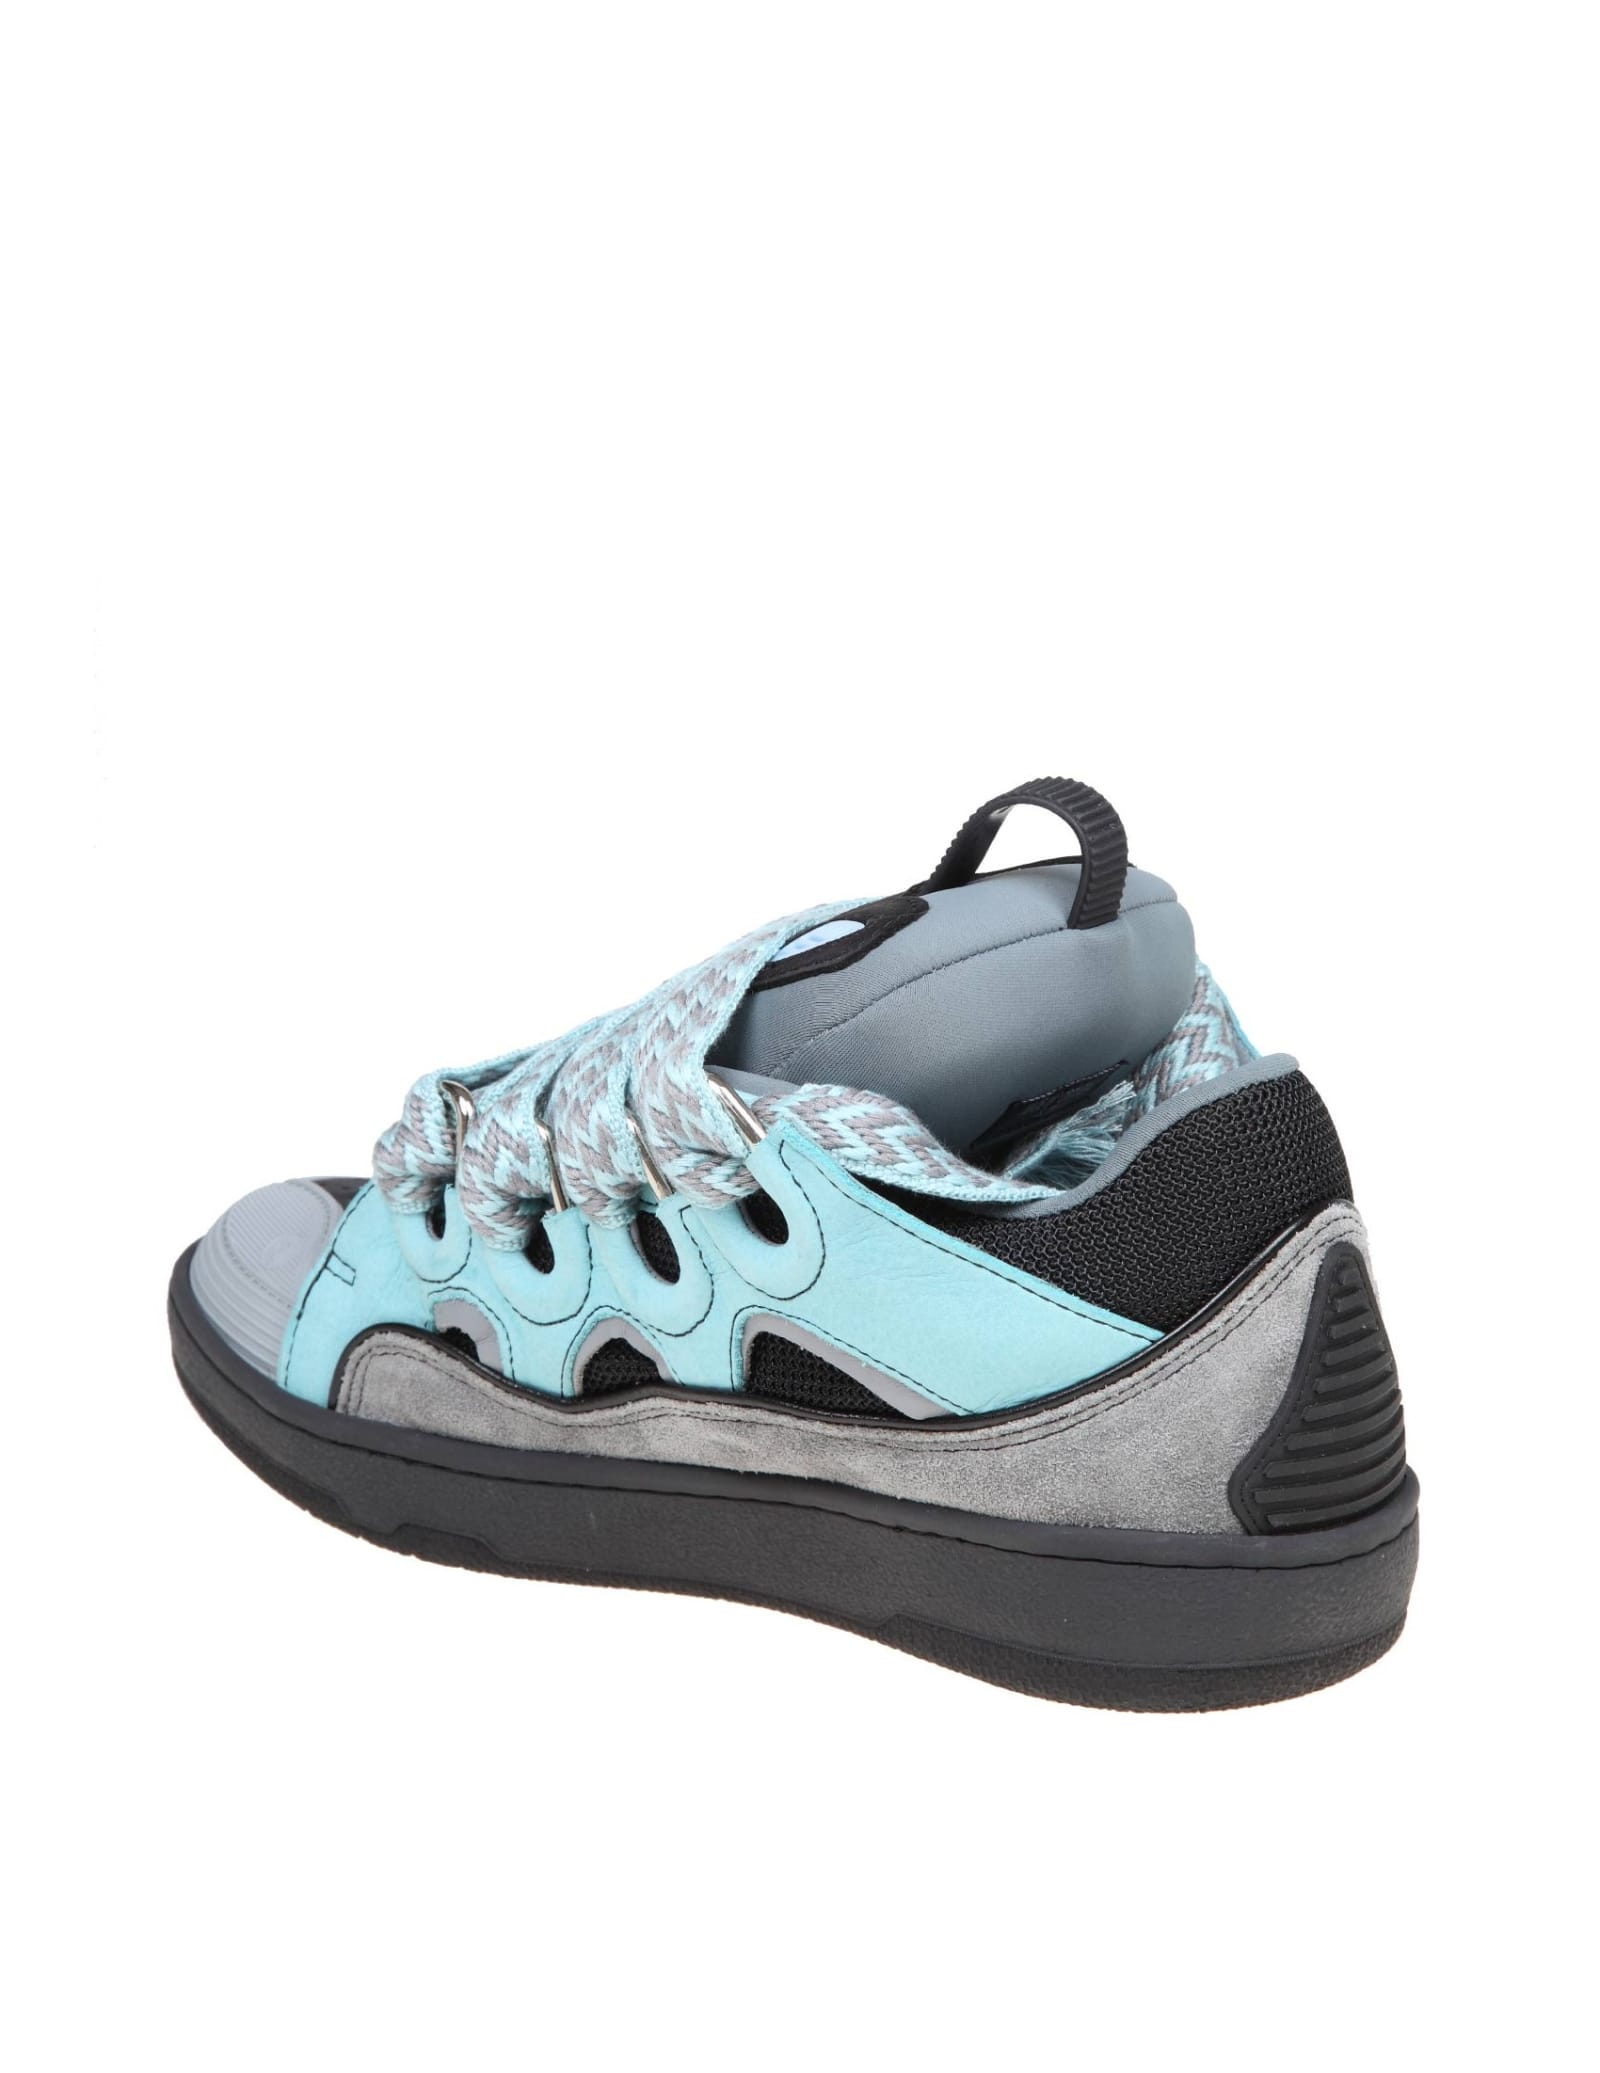 Shop Lanvin Curb Sneakers In Suede And Fabric Color Light Blue/anthracite In Light/blue/anthracite